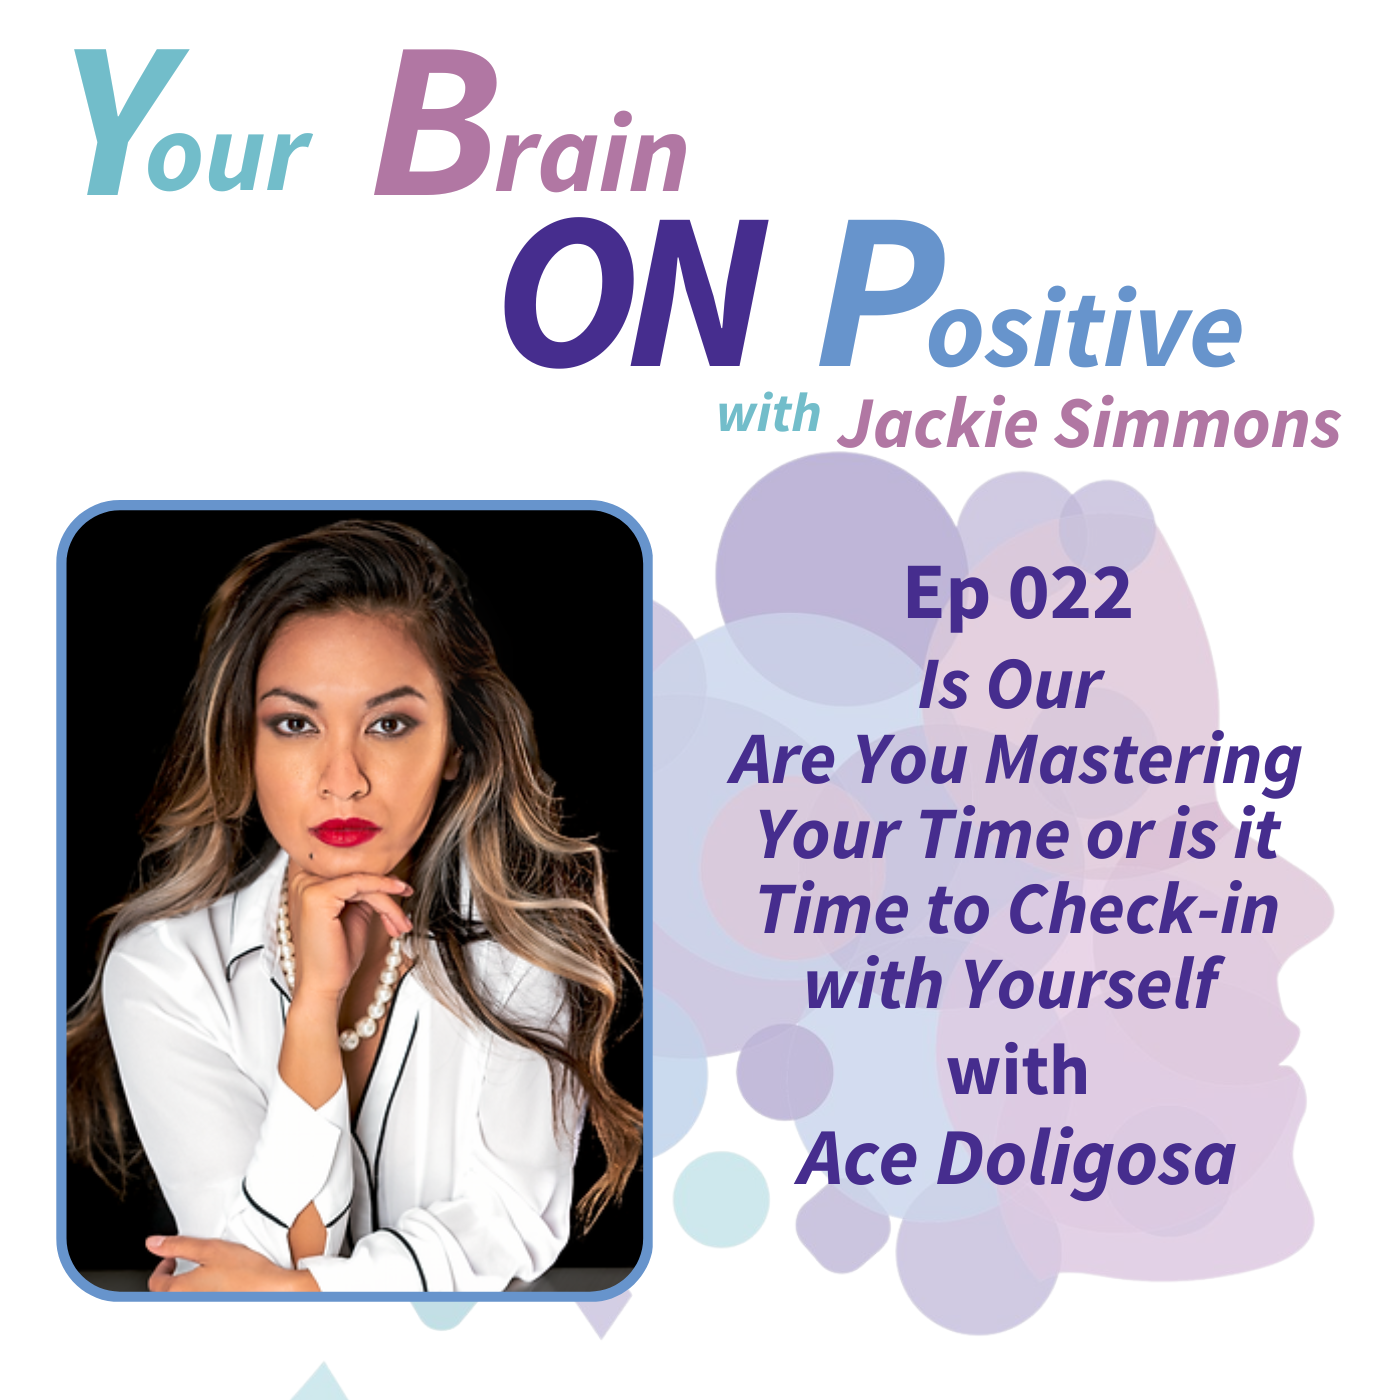 Are You Mastering Your Time or is it Time to Check-in with Yourself? - Ace Doligosa